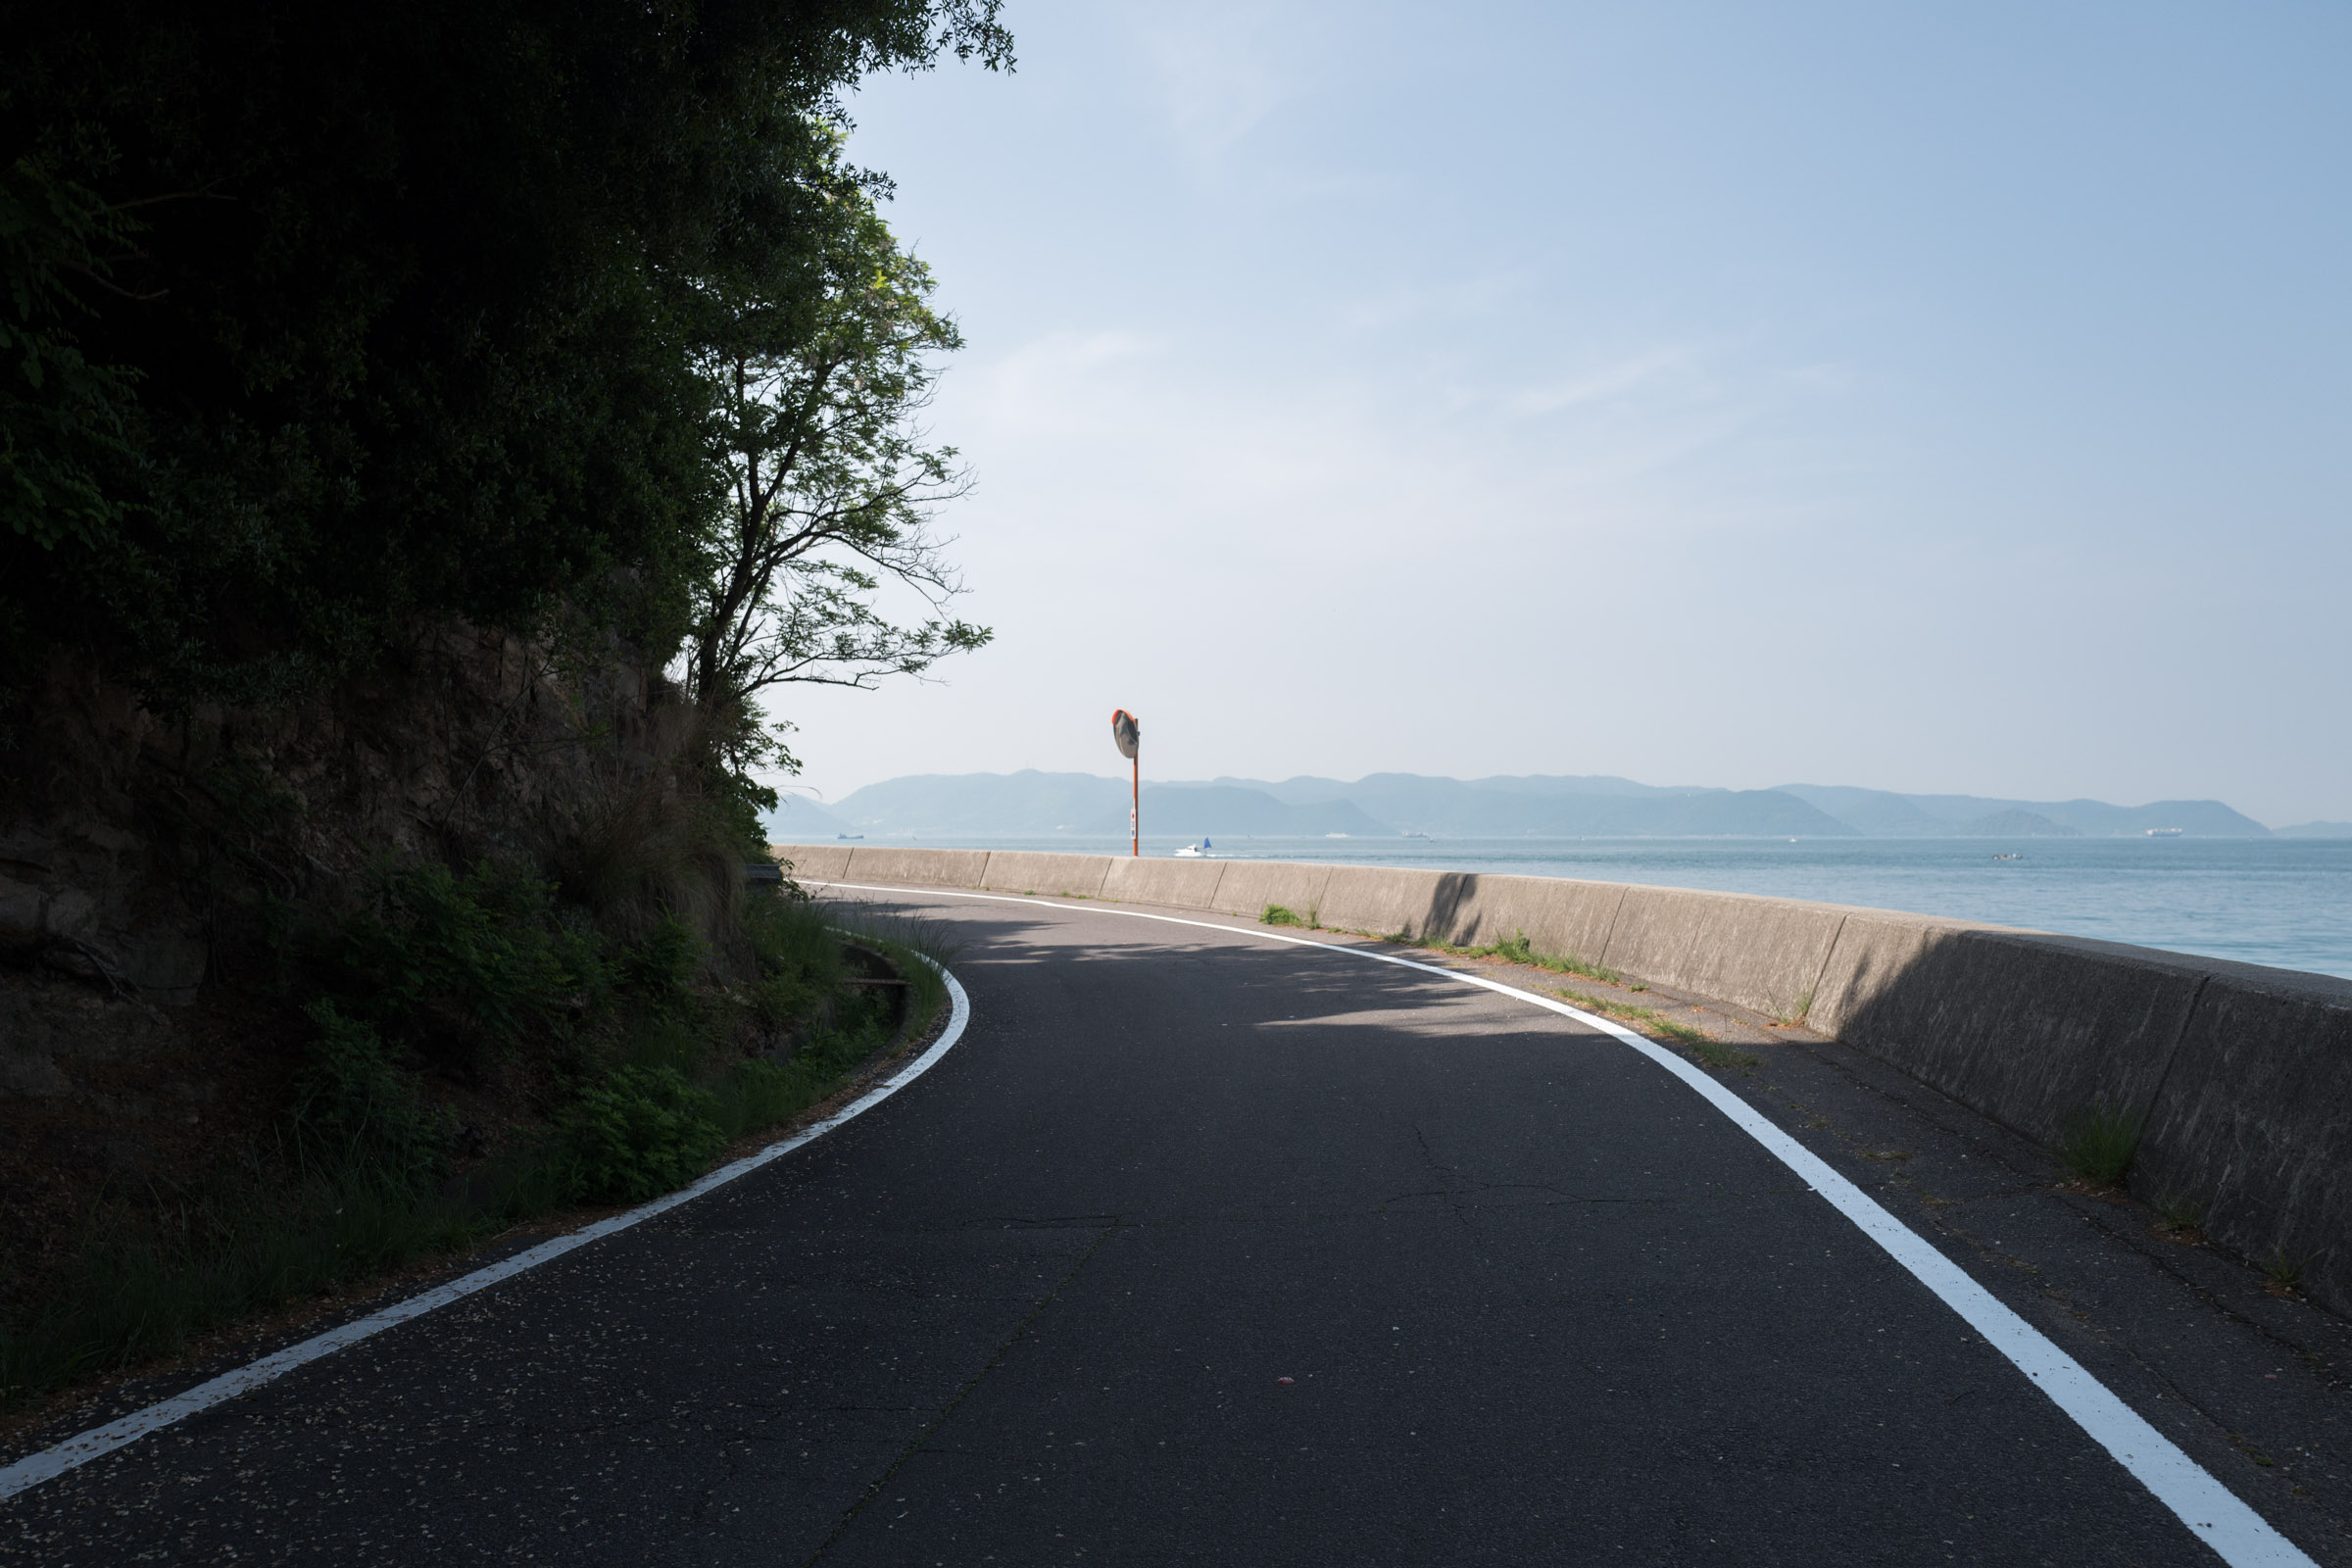 Road leading to the Benesse Art Area on Naoshima